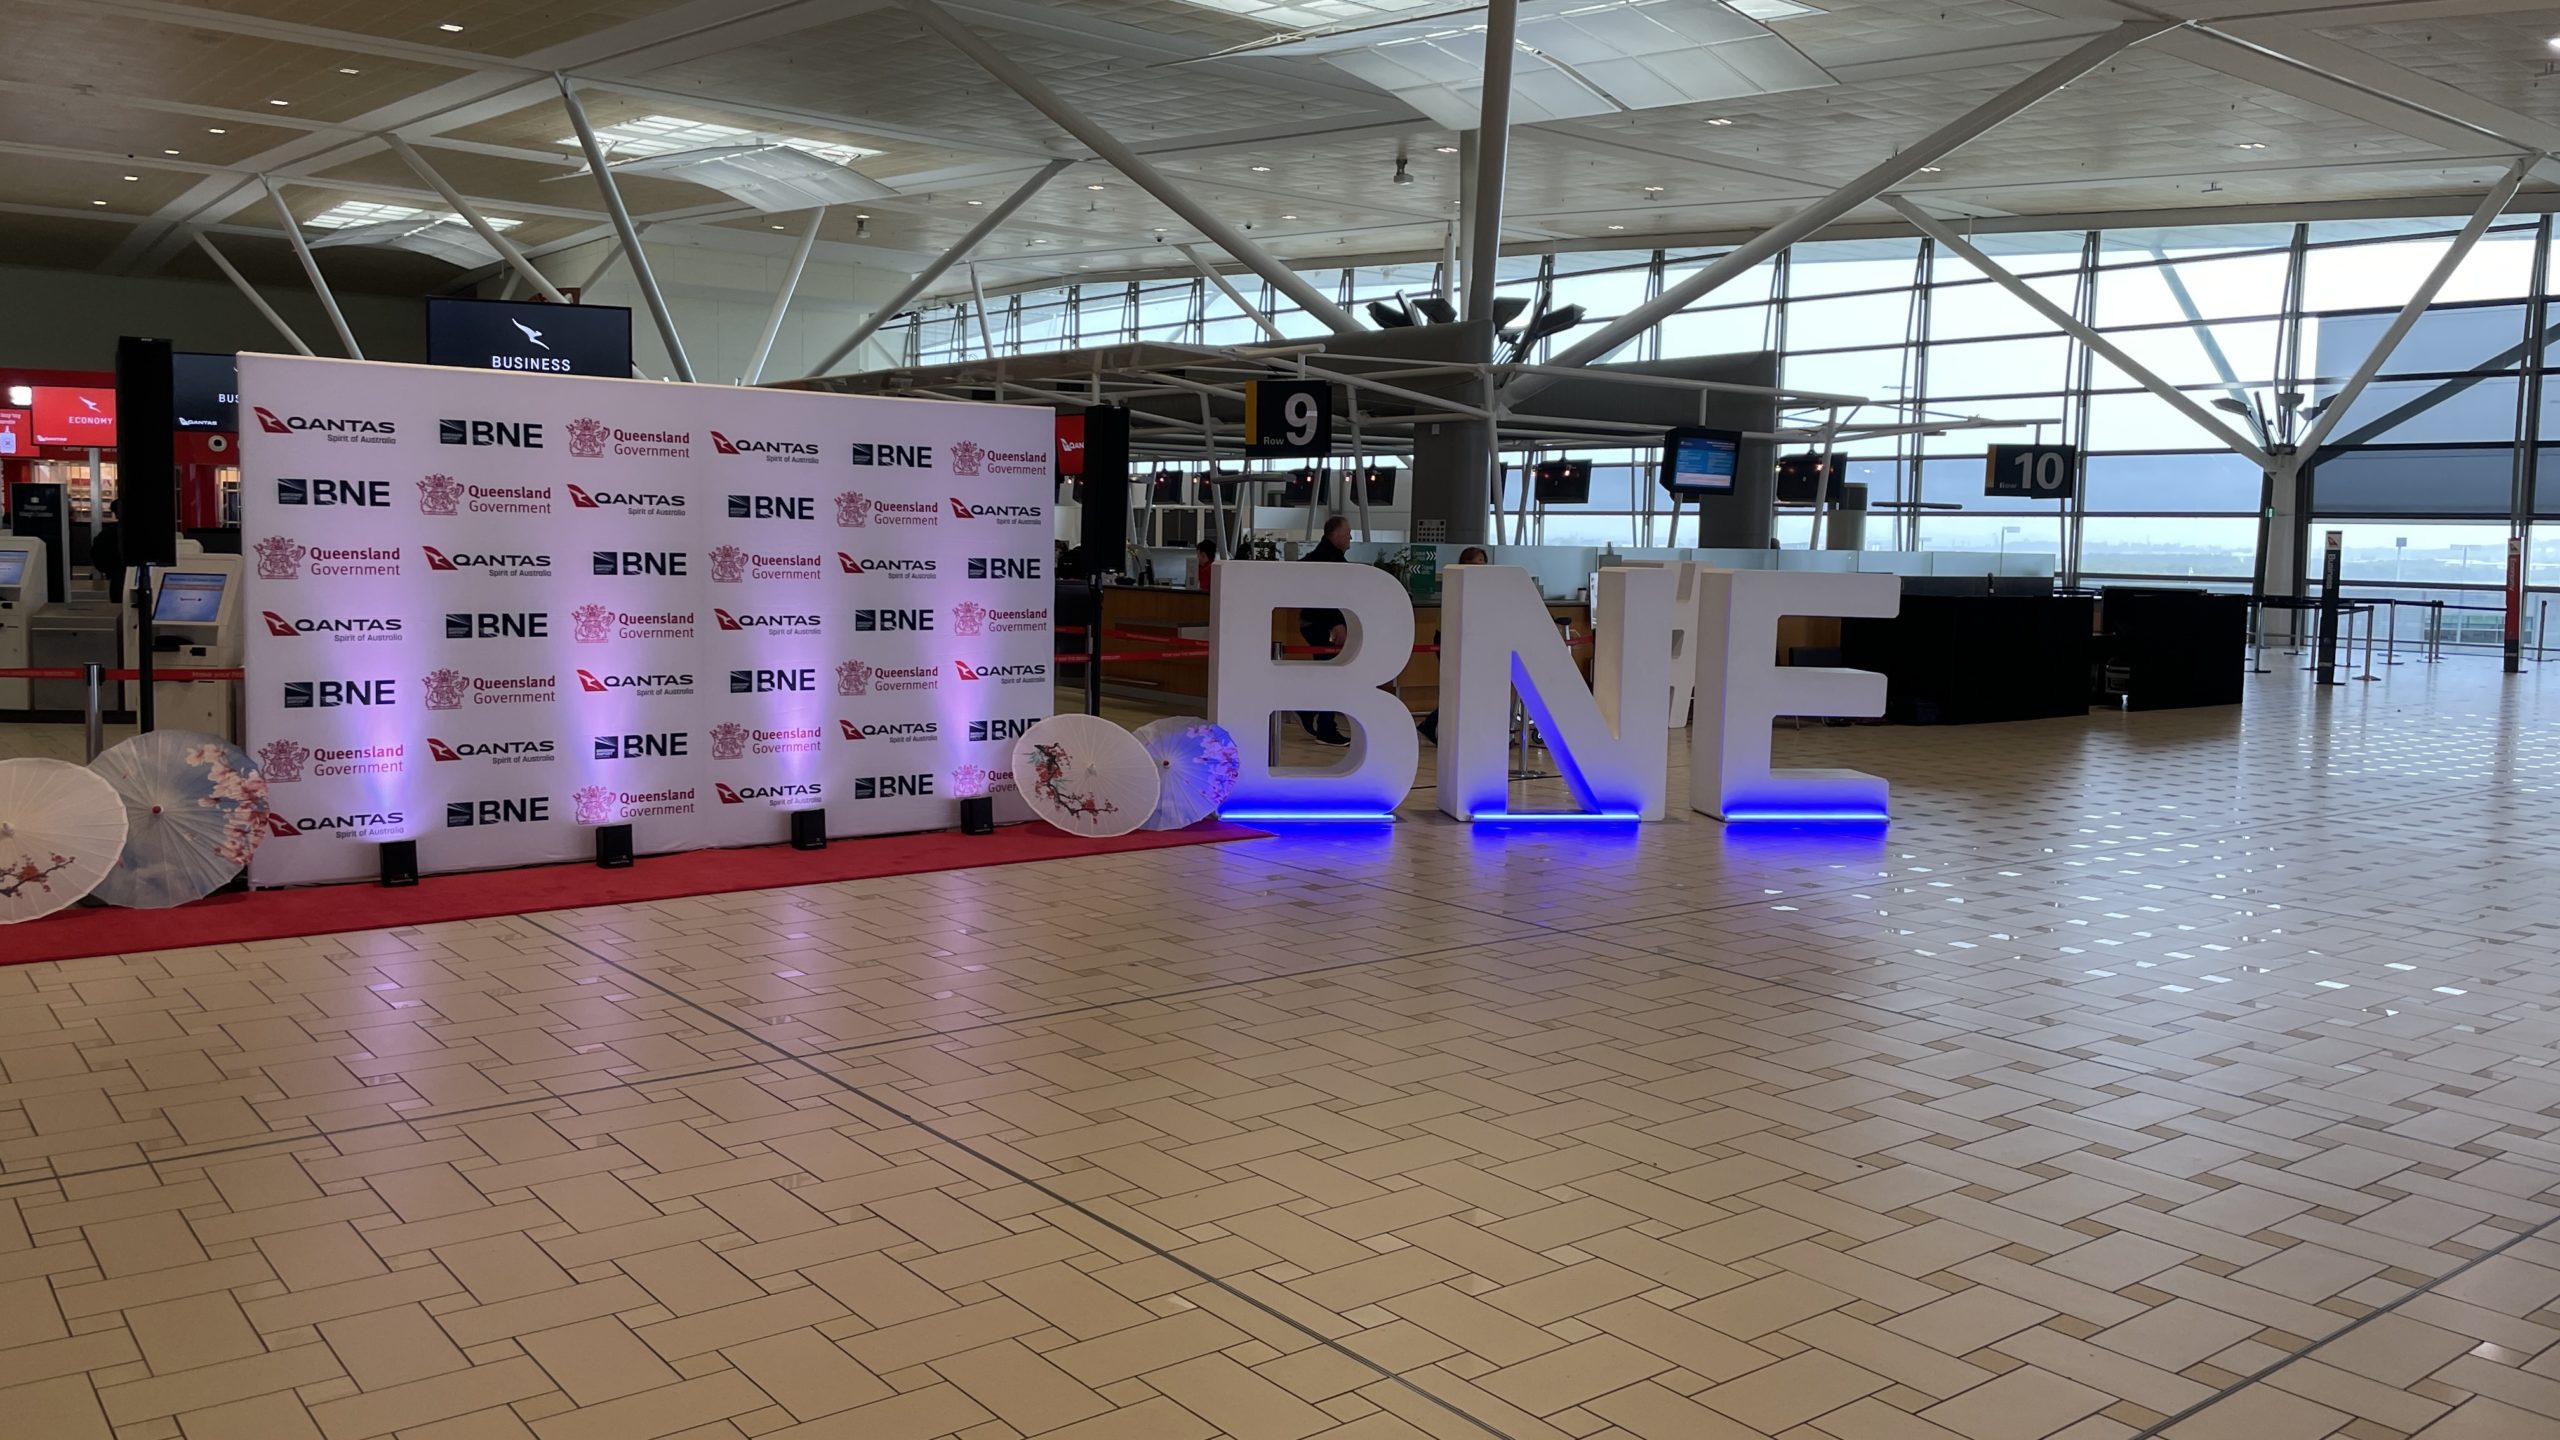 Brisbane Airport BNE sign on angle